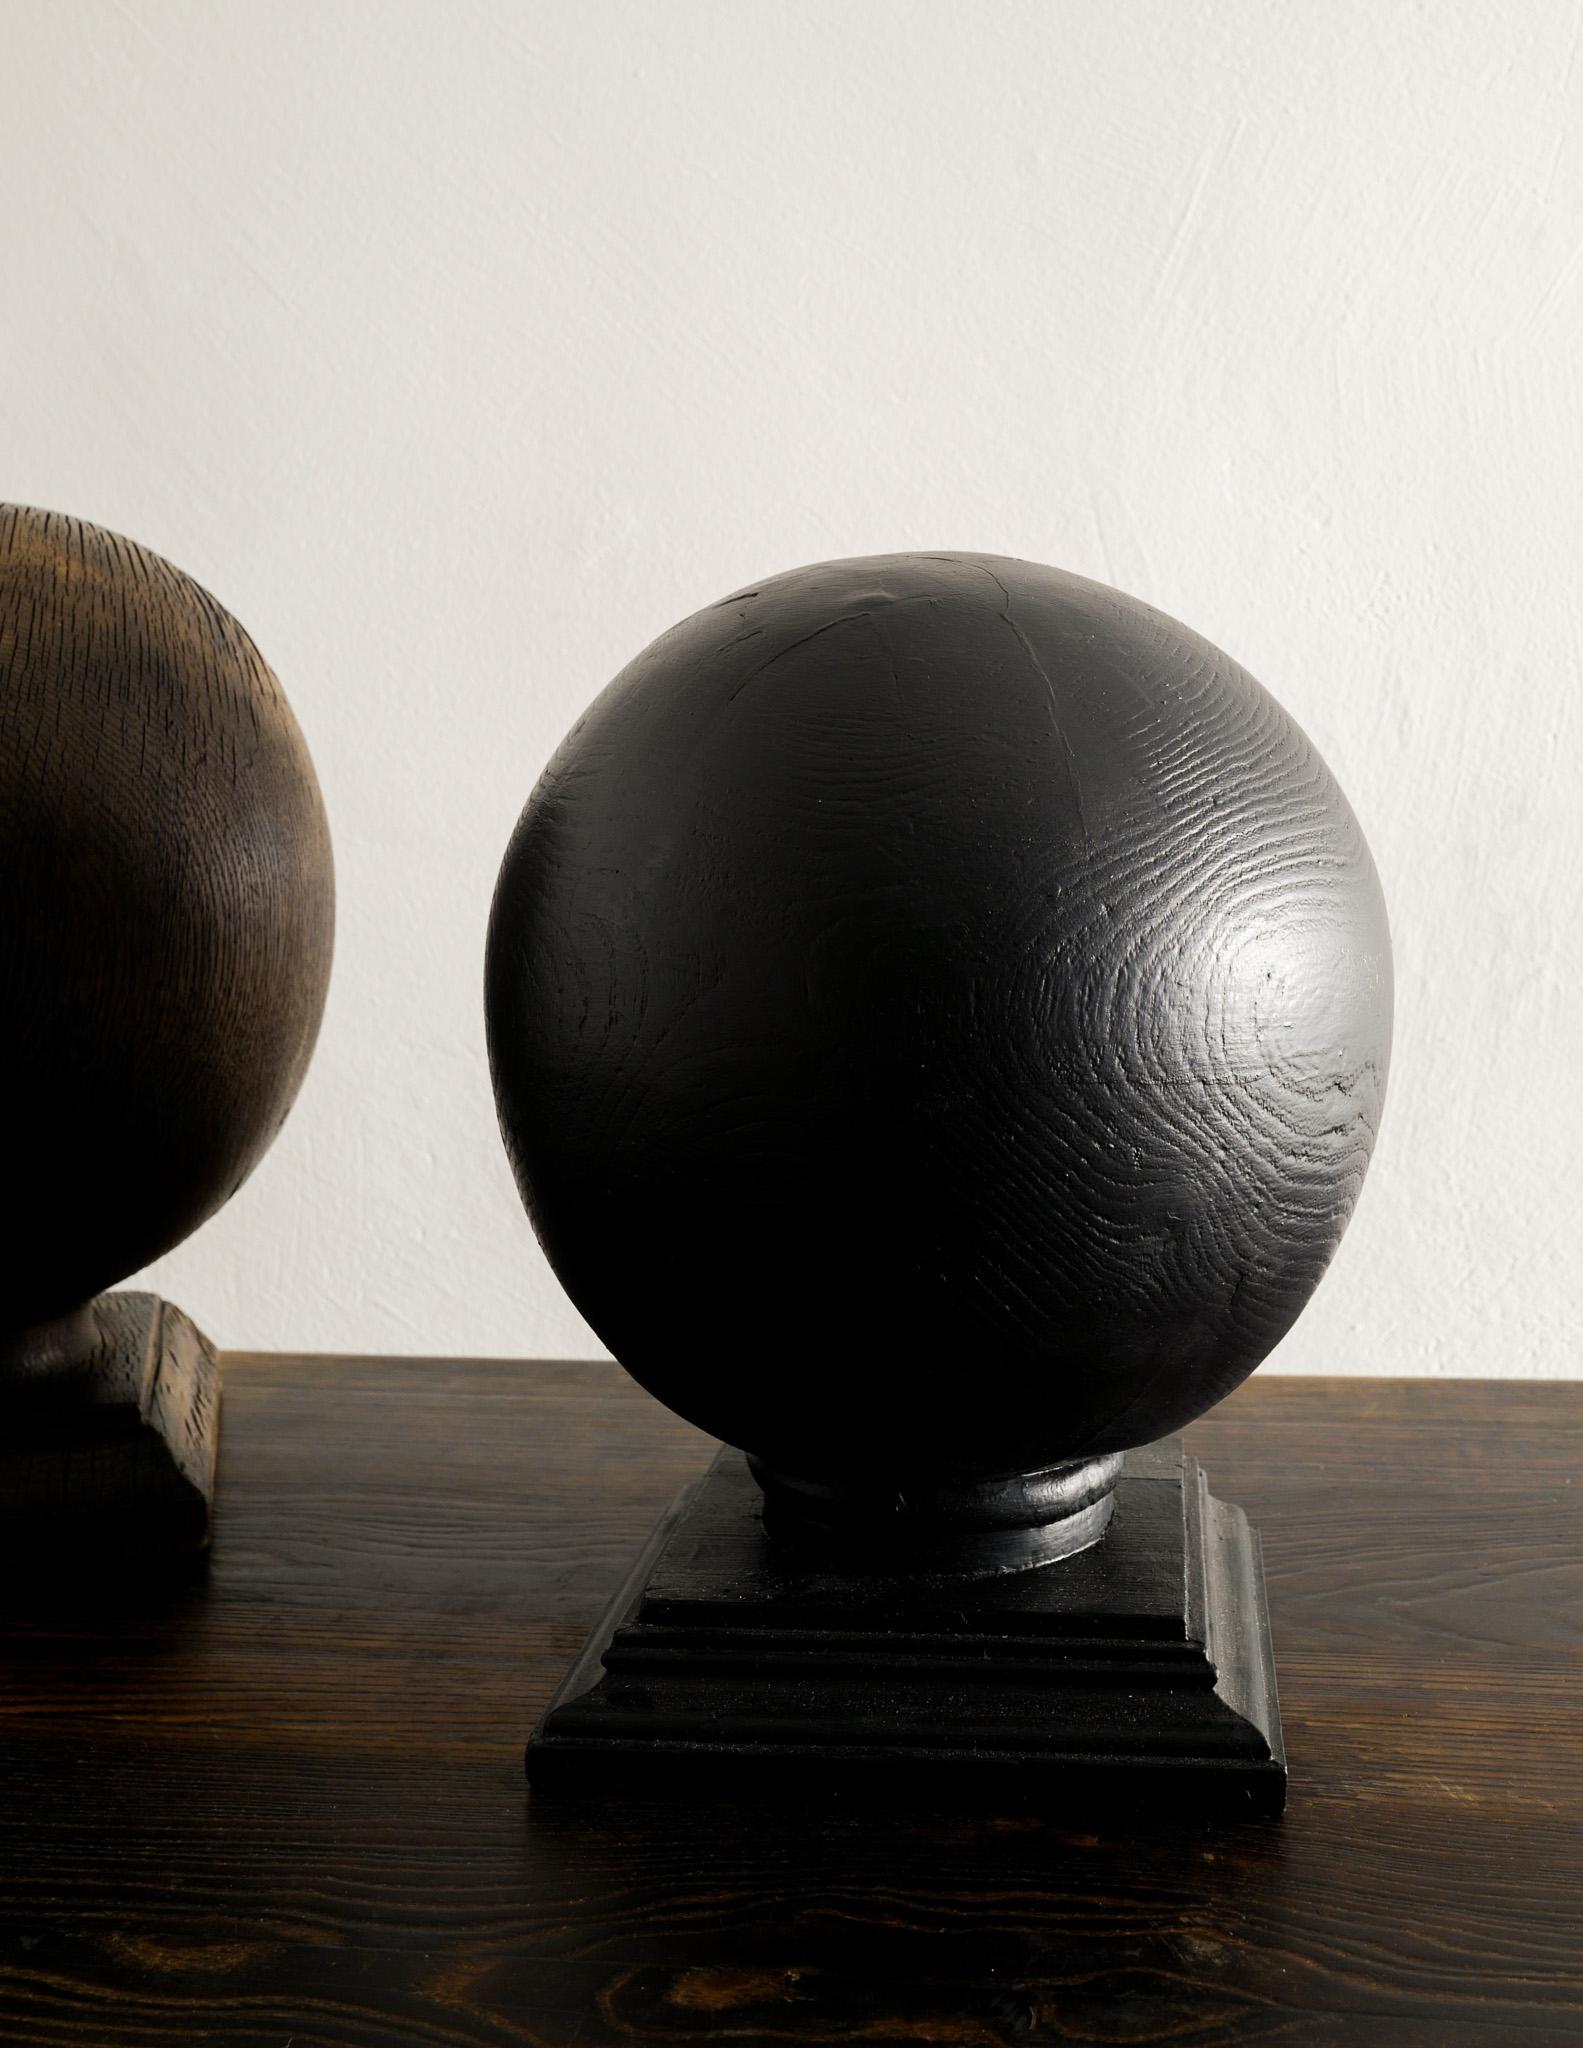 Pair of mid century globe sculptures in solid oak and ebonized pine. Both sculptures are in great condition and showing minimal signs of use. Perfect as they are or as bookends etc. 

Dimensions: Brown: H: 39 x W: 29 x D: 25 cm Black: H: 34 x W/D: